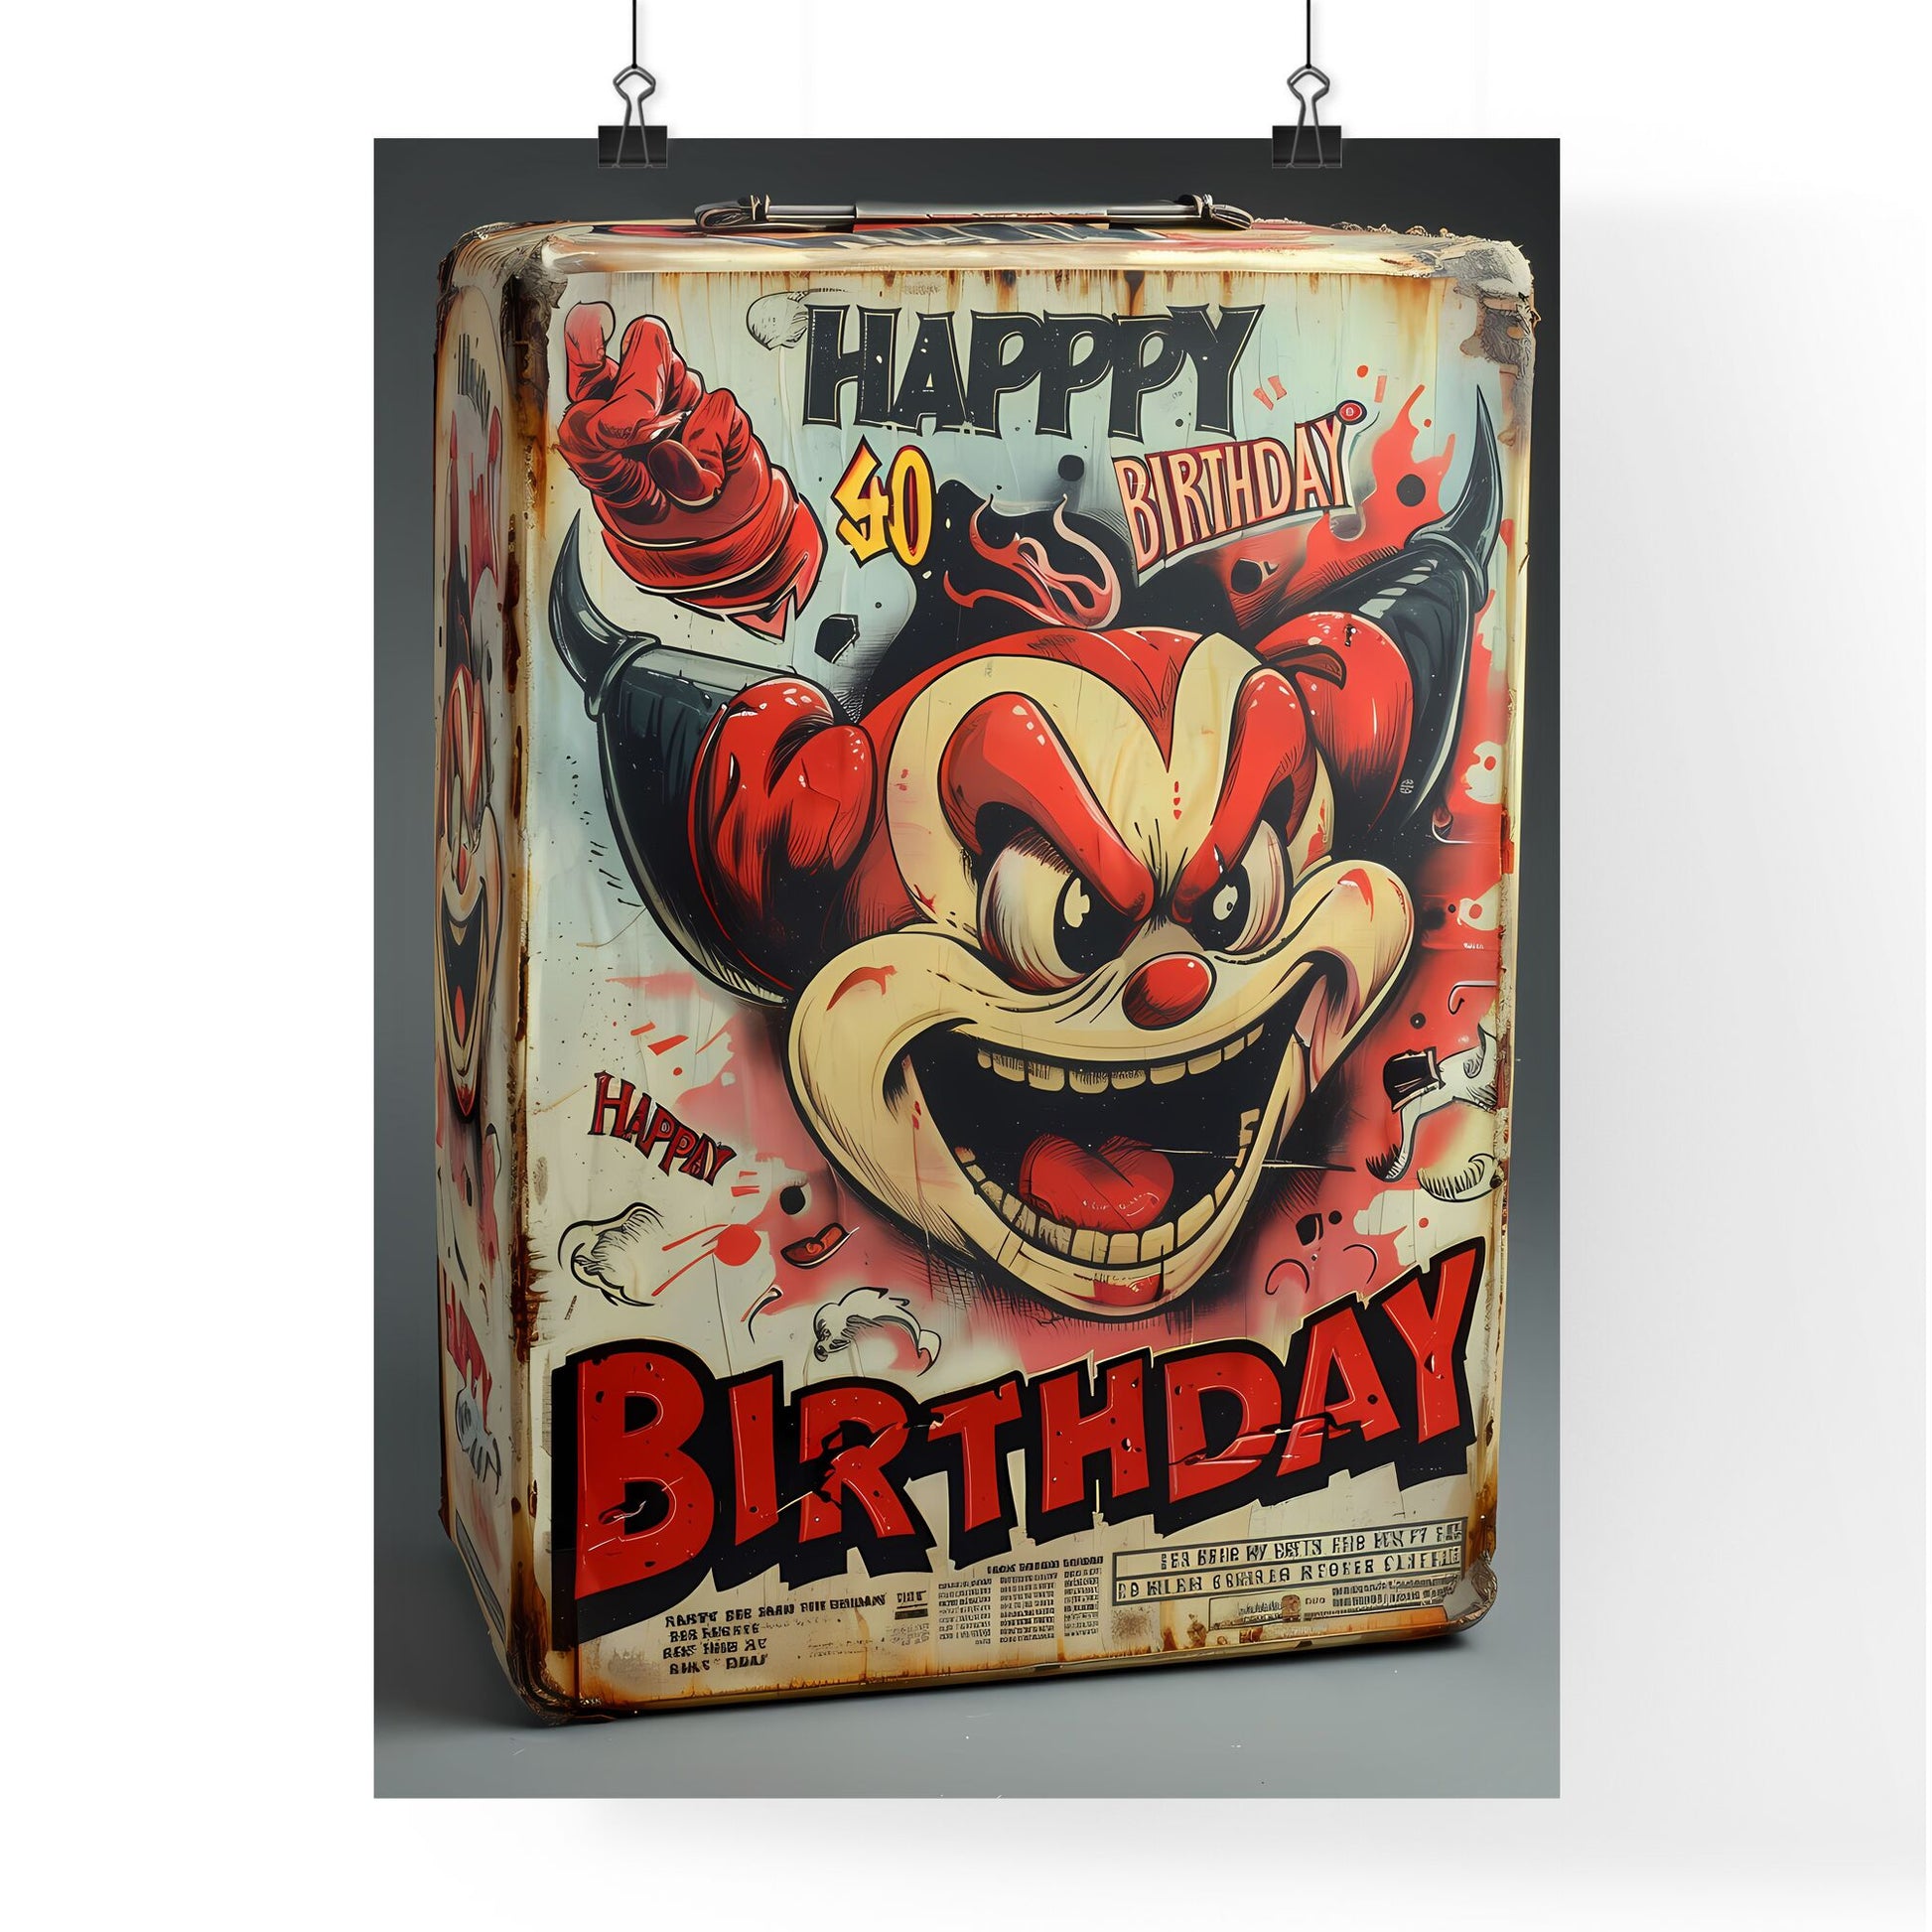 Vintage 1980s Horror Movie Advertising: Happy Birthday Utopian Packaging with Retro Comic Book Style Illustrations and Pop Culture Icons Default Title